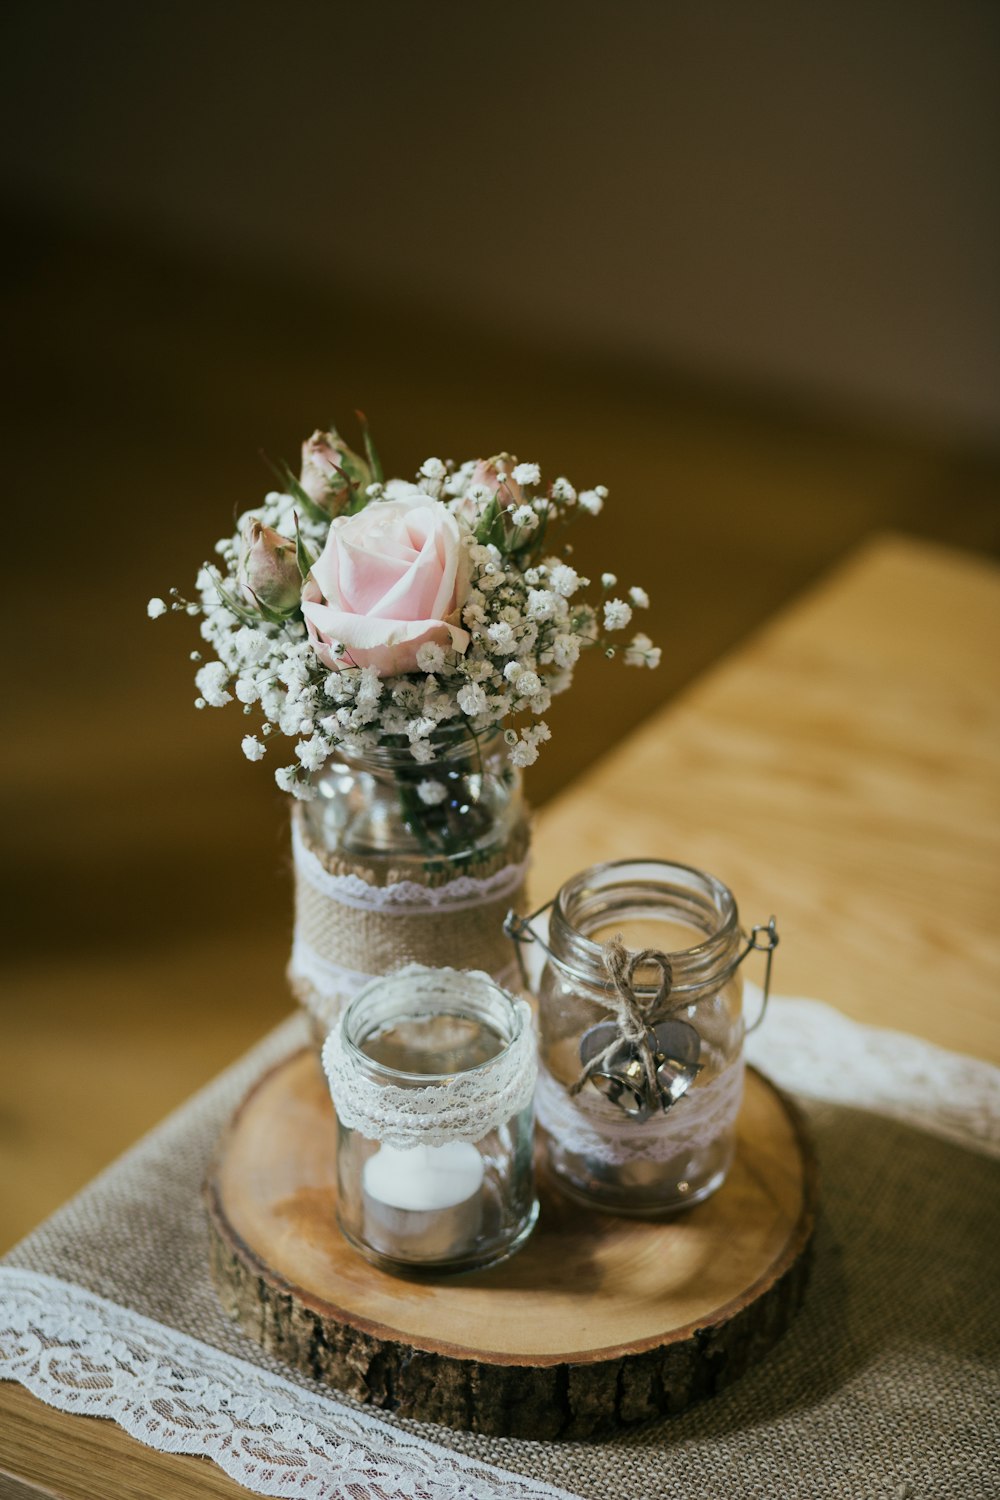 shallow focus photography of white and pink flowers in clear glass vase